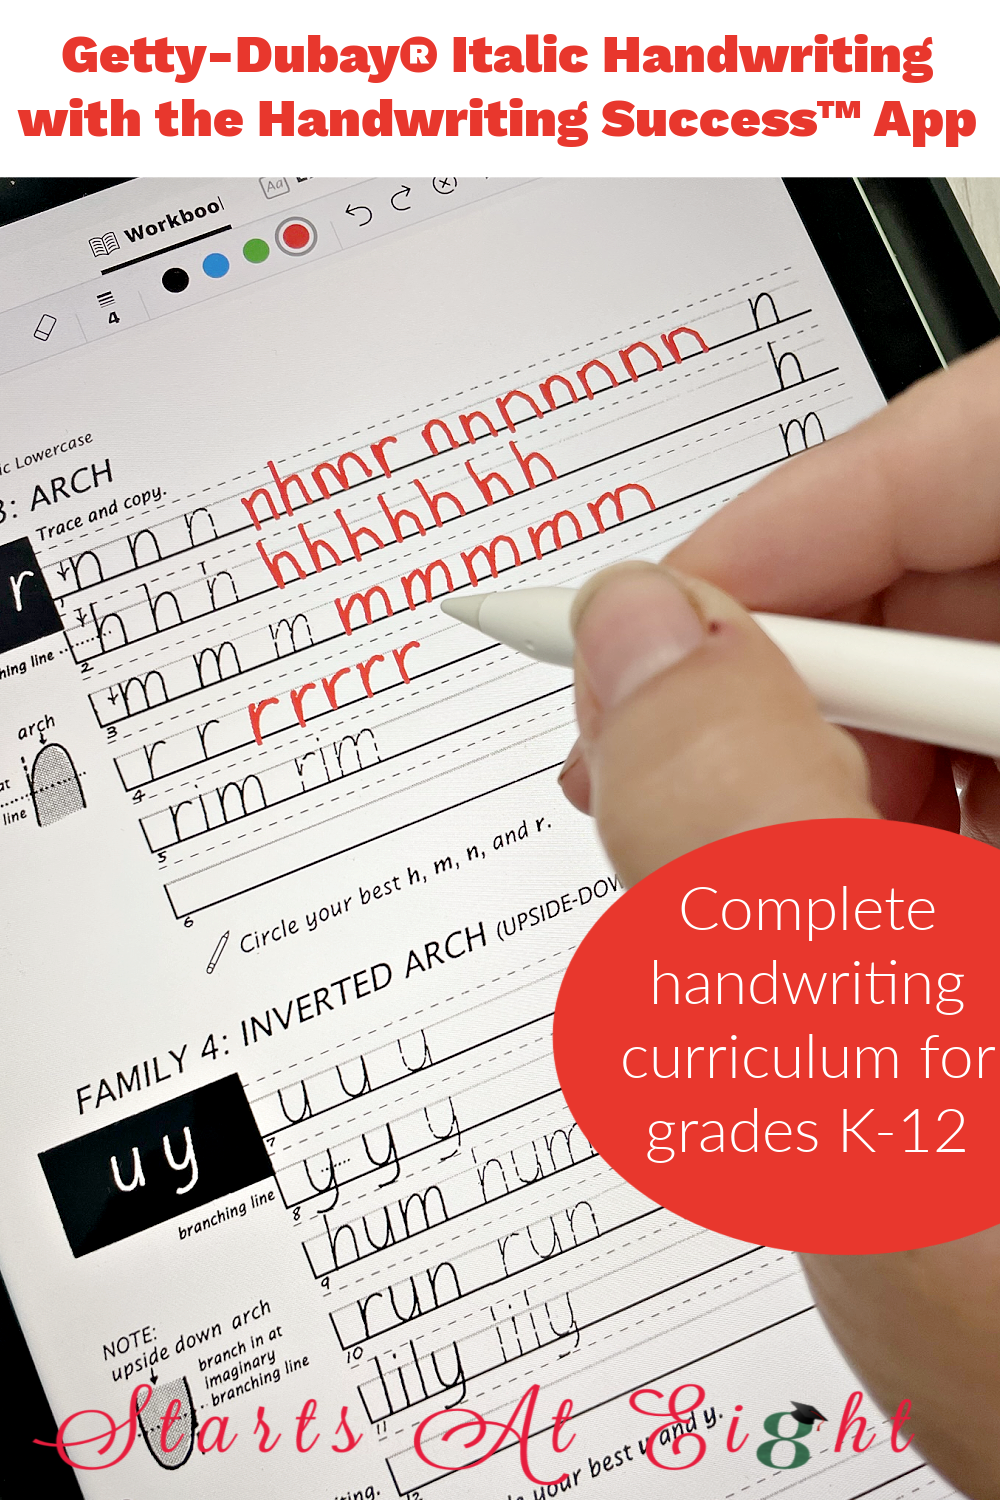 The Handwriting Success™ App is a handwriting App for teaching cursive using Getty-Dubay® Italic Handwriting, making it easy to learn, even on the go!